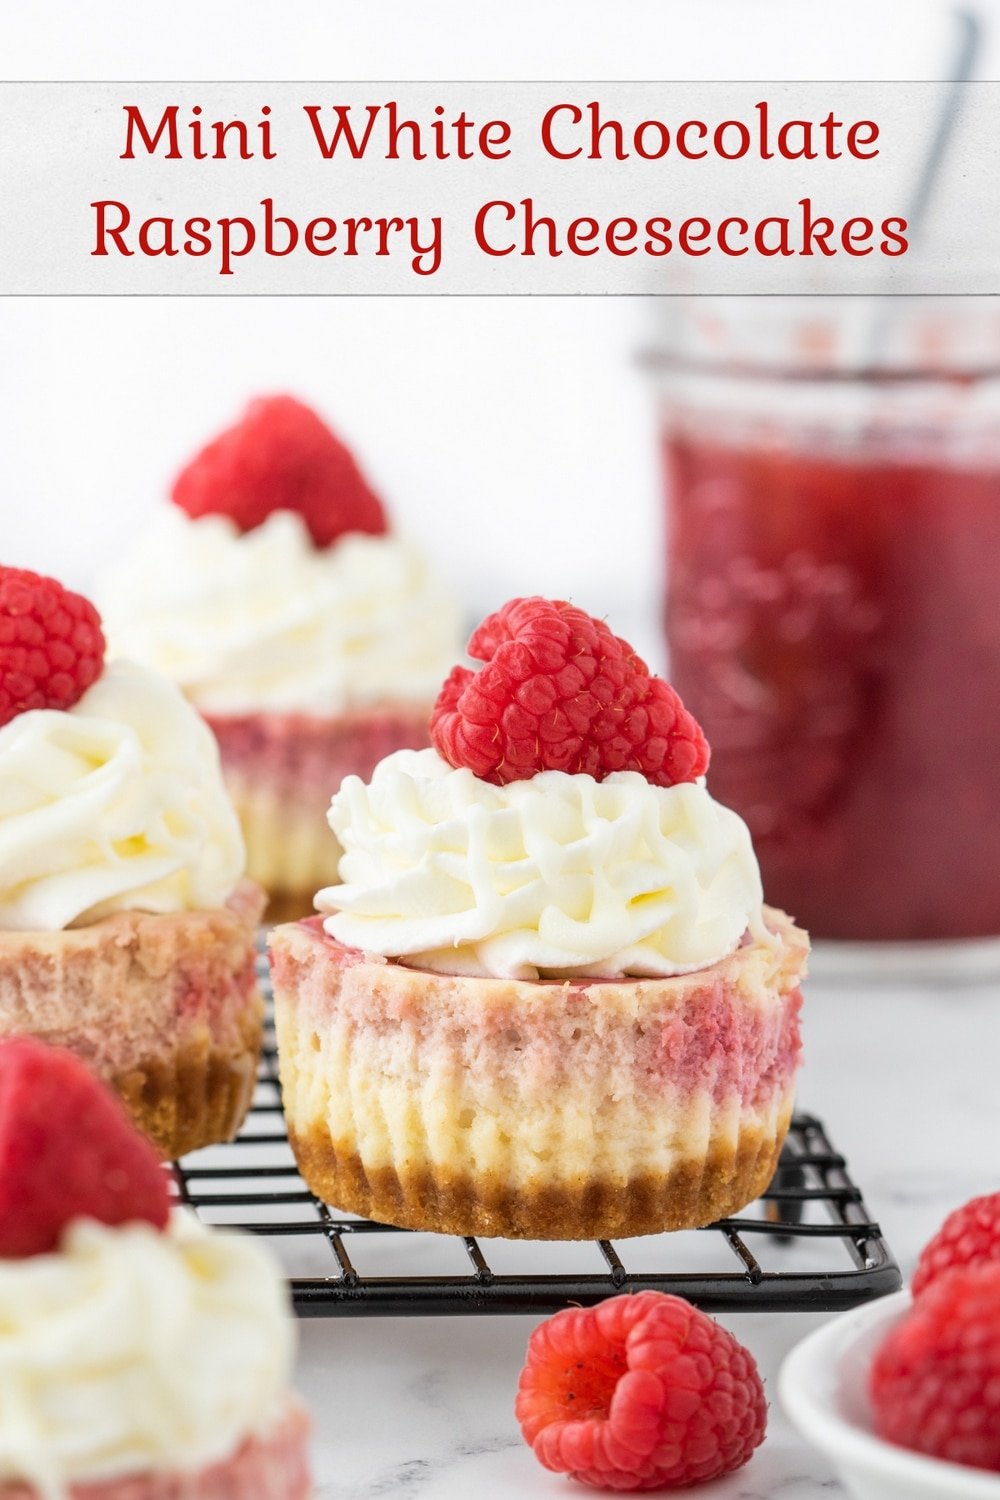 Indulge in these bite-sized treats with a twist! Our Mini White Chocolate Raspberry Cheesecakes are made in a muffin tin, featuring a creamy cheesecake filling with a swirl of tangy raspberries, all nestled on top of a buttery graham cracker crust. Topped generously with a dollop of whipped cream and a drizzle of white chocolate, these cheesecakes are sure to be a hit at your next gathering or just as a sweet treat for yourself. #minicheesecake #raspberry #whitechocolate #dessert #bitesizedtreats #cheesecakerecipes via @cmpollak1